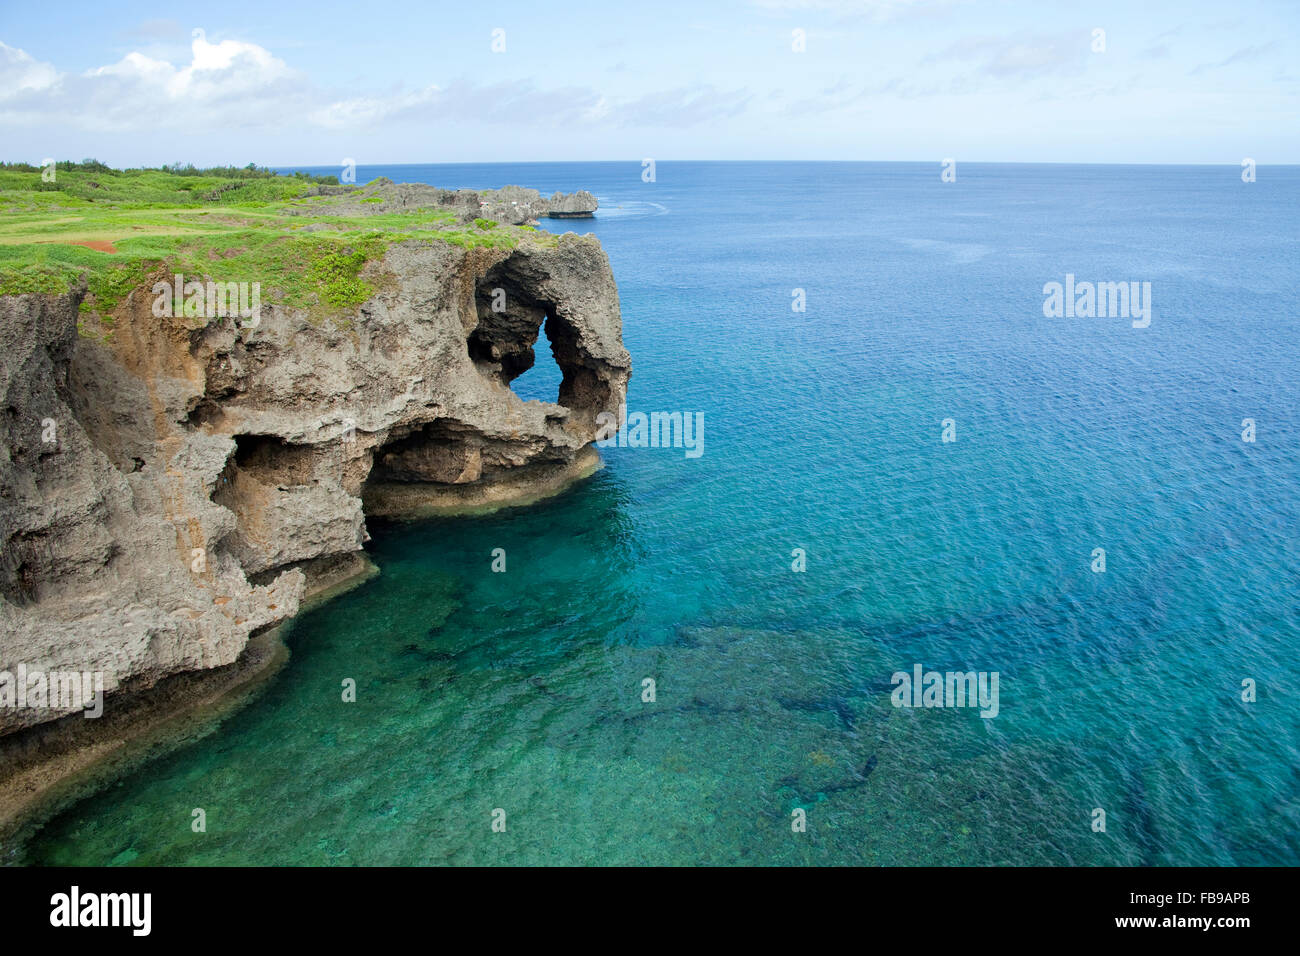 Blue ocean and cliff, Okinawa Prefecture, Japan Stock Photo